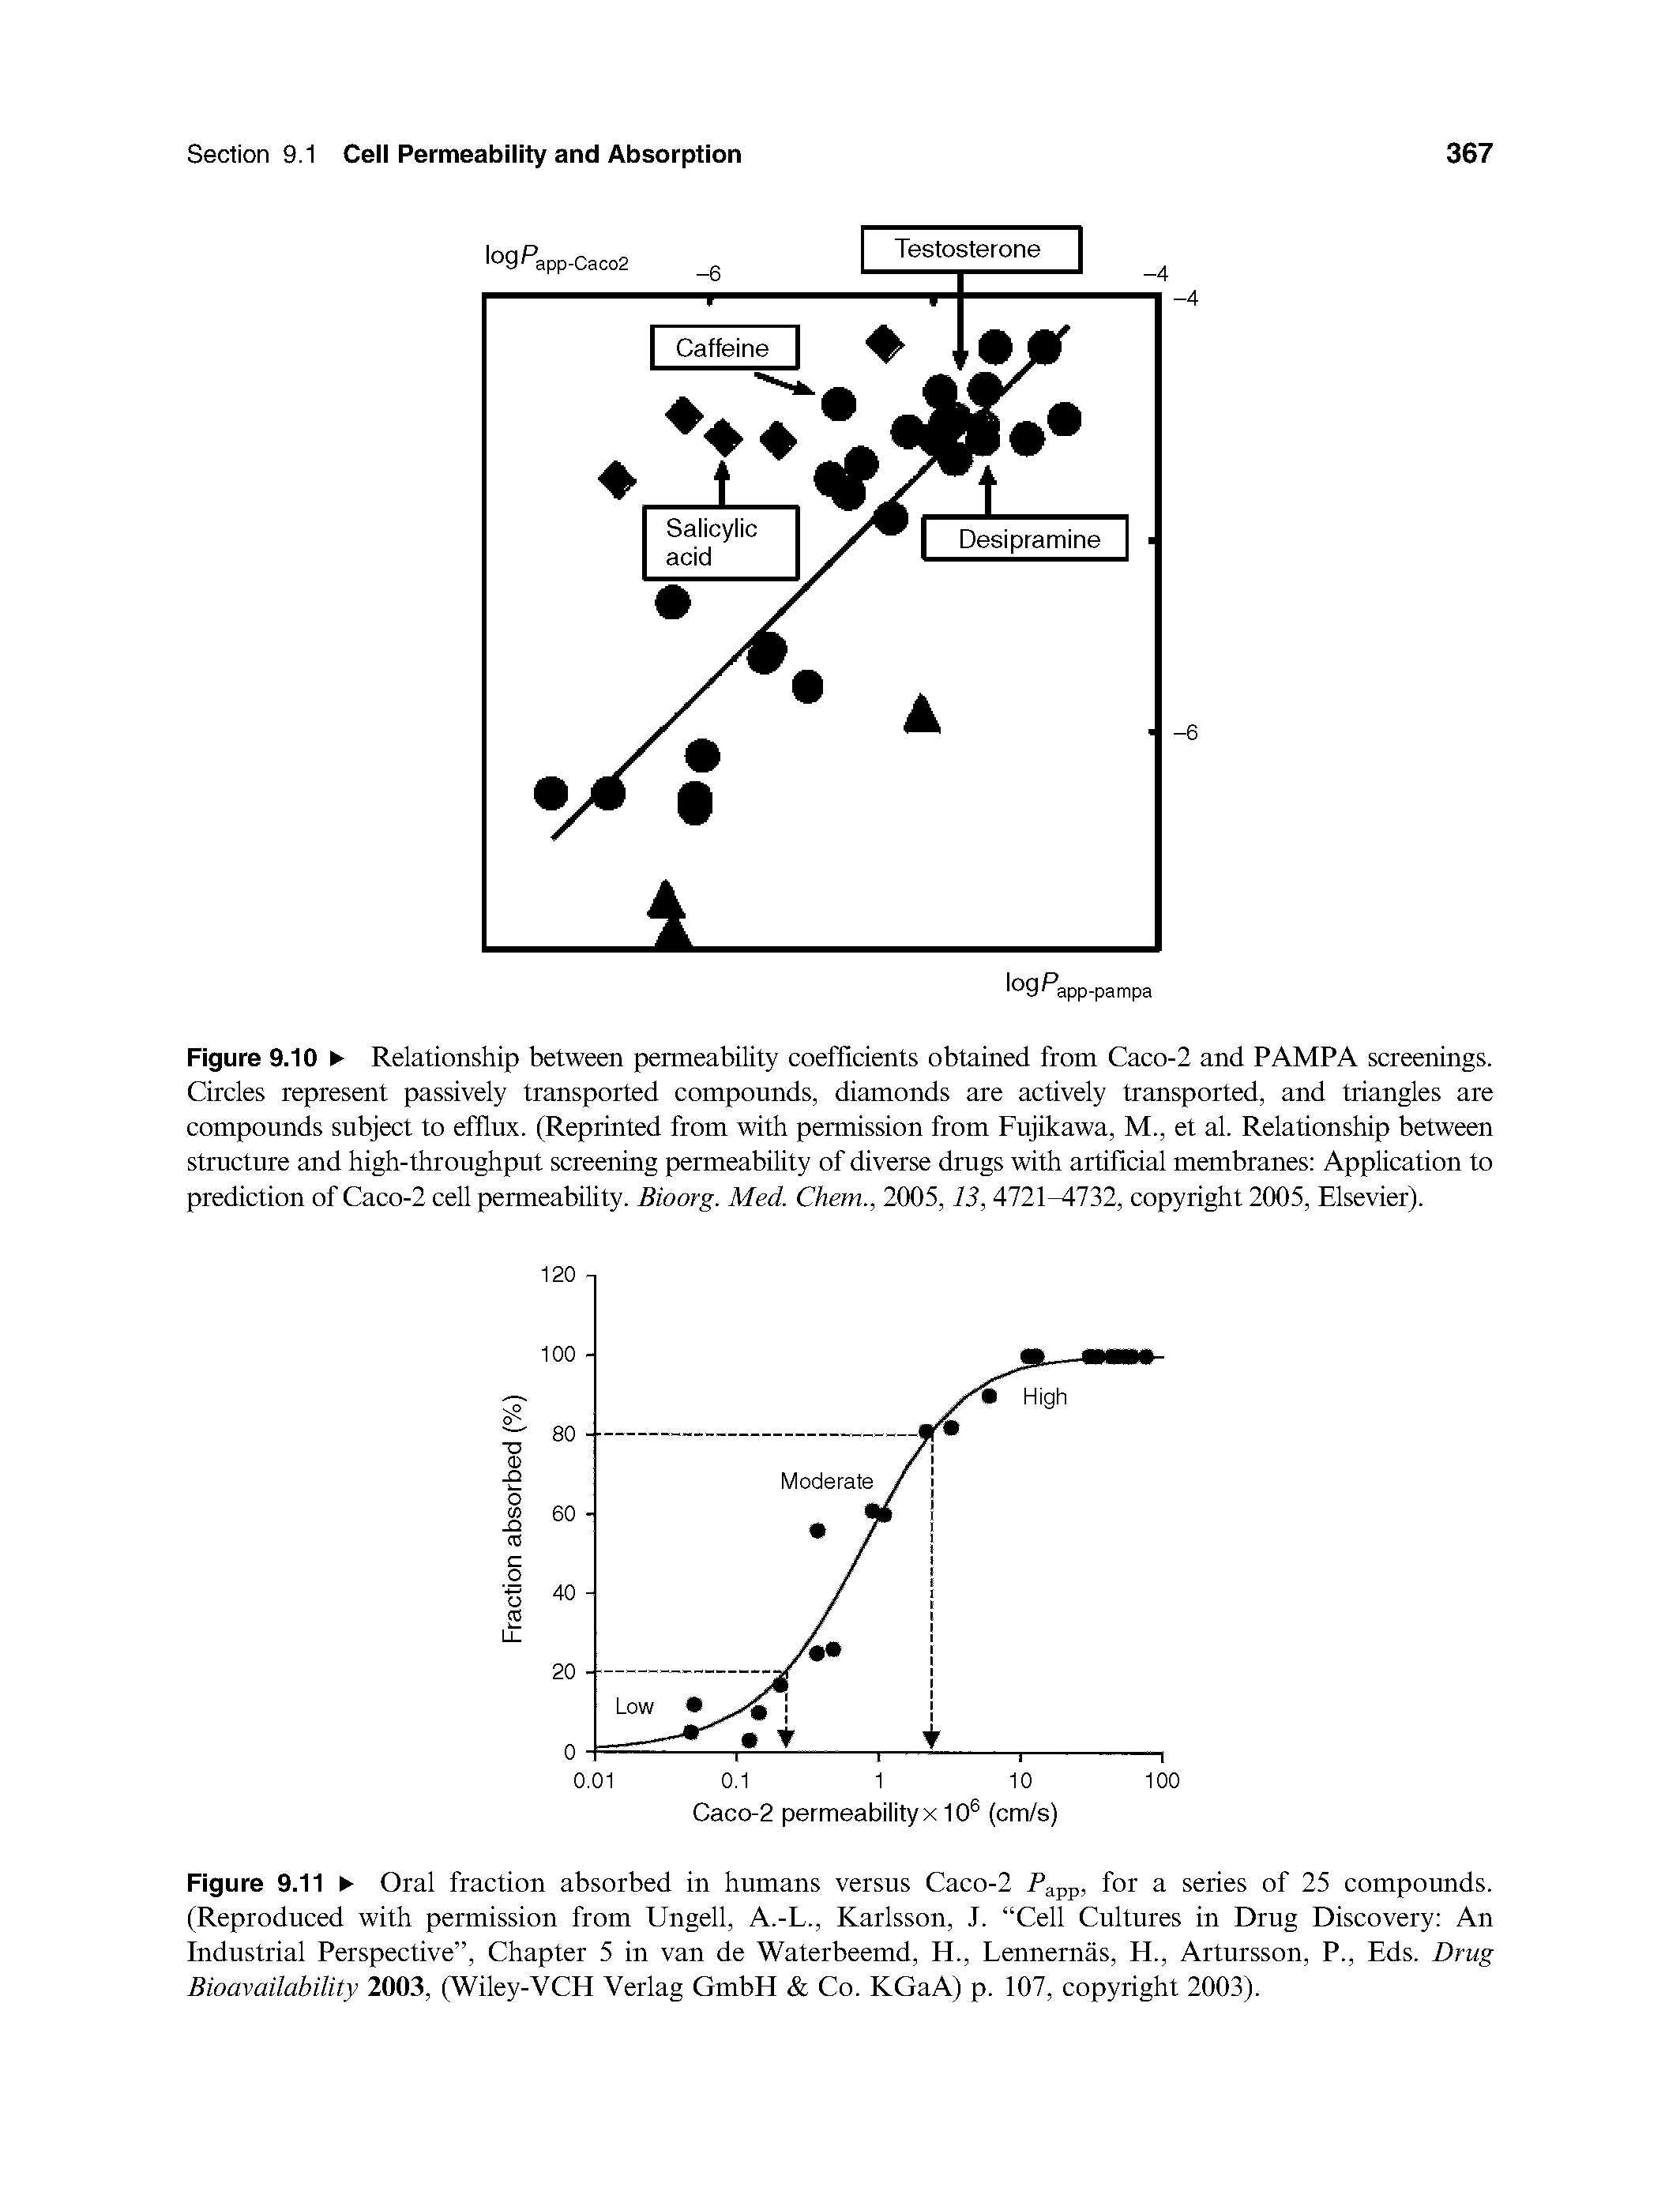 Figure 9.10 Relationship between permeability coefficients obtained from Caco-2 and PAMPA screenings. Circles represent passively transported compounds, diamonds are actively transported, and triangles are compounds subject to efflux. (Reprinted from with permission from Fujikawa, M., et al. Relationship between structure and high-throughput screening permeability of diverse drugs with artificial membranes Application to prediction of Caco-2 cell permeability. Bioorg. Med. Chem., 2005,13, 4721 732, copyright 2005, Elsevier).